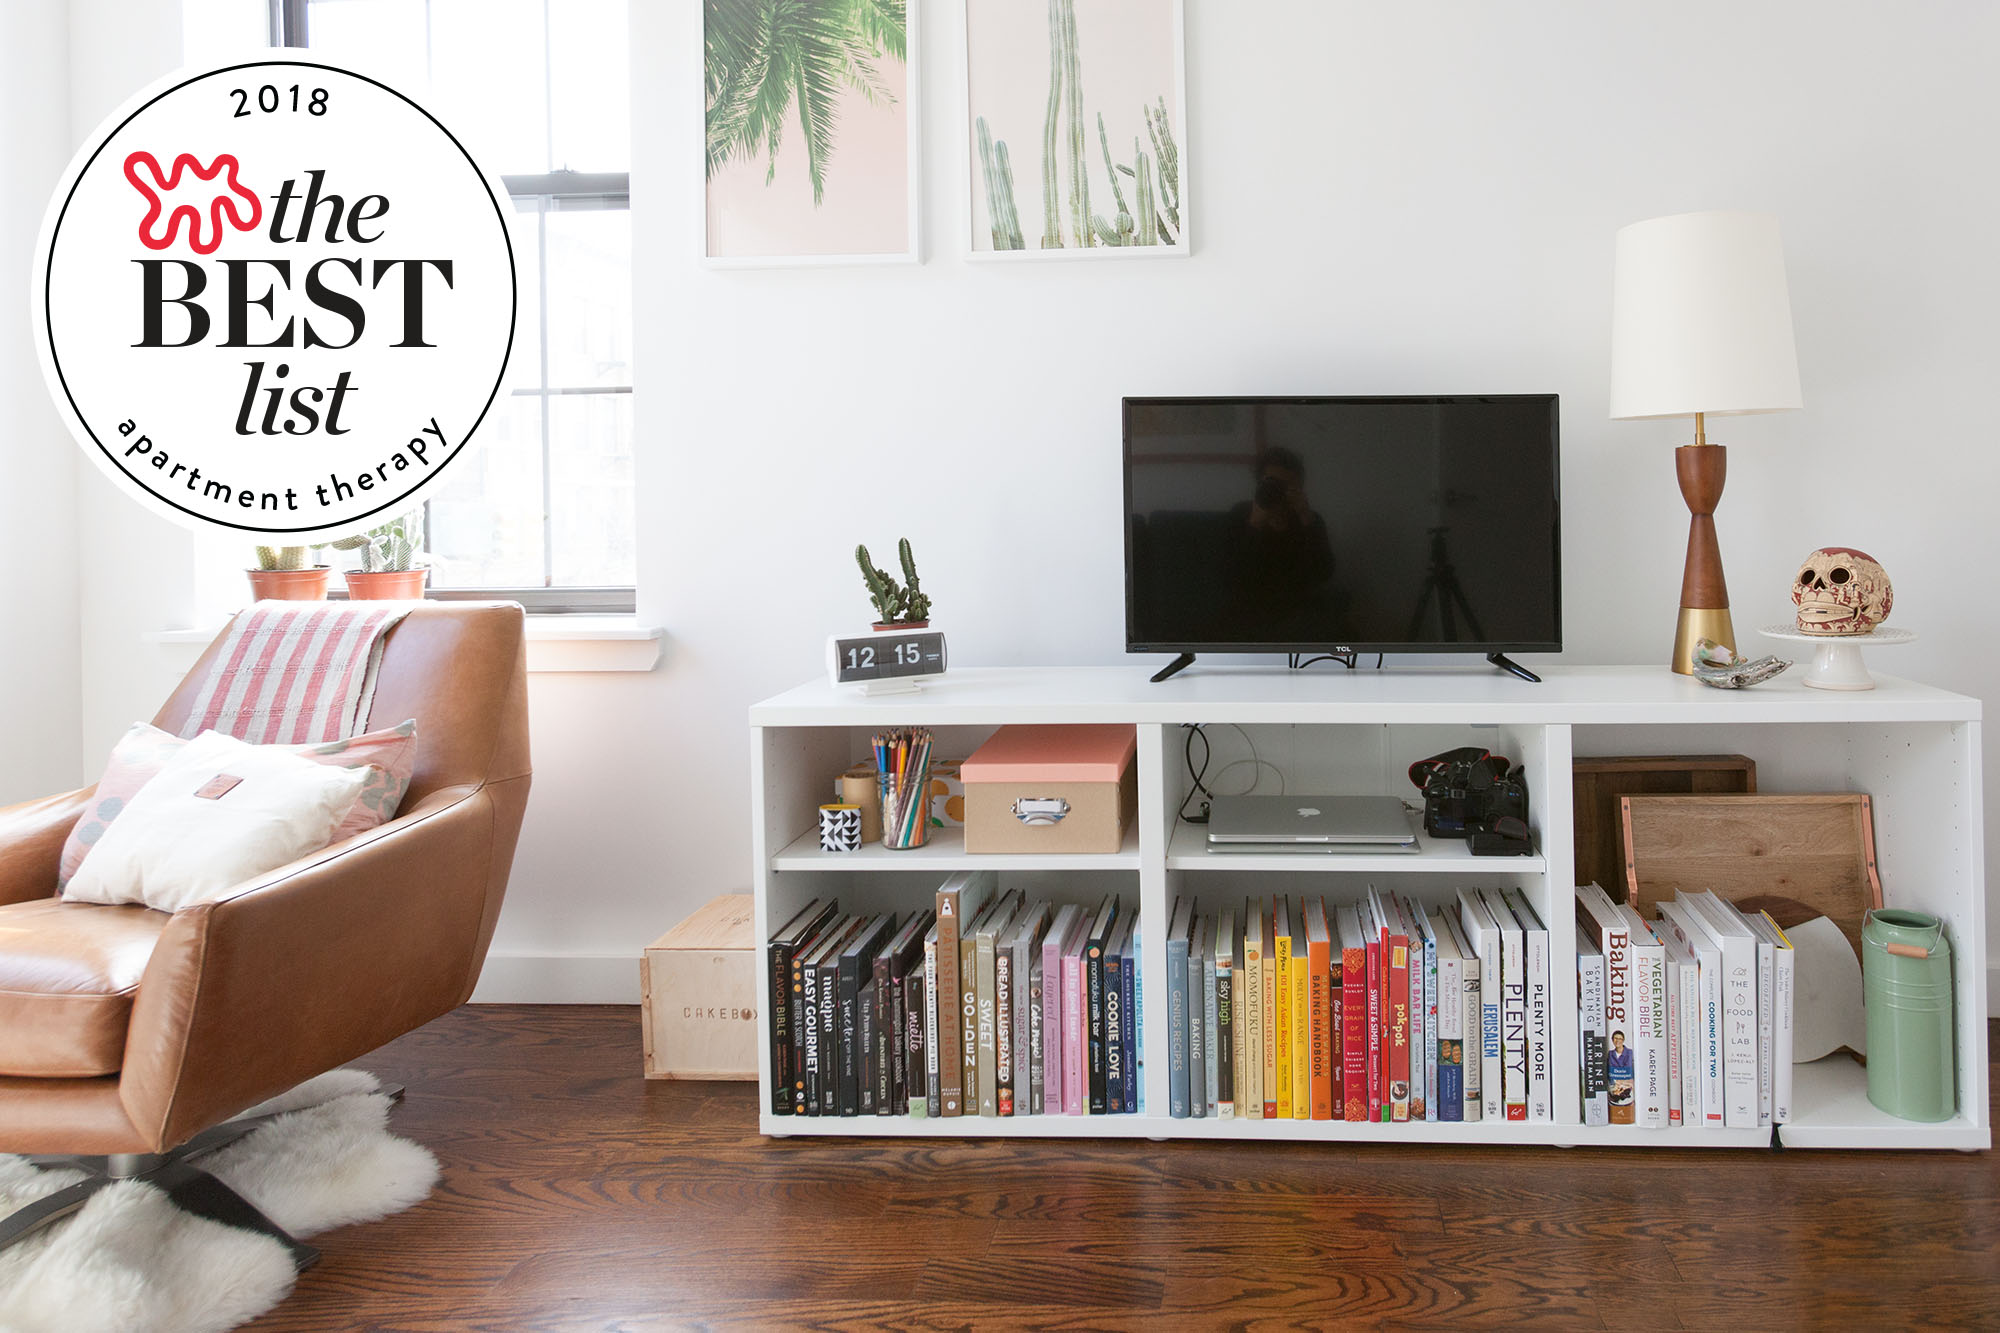 The Best Bookshelves And Bookcases To Buy In 2018 Apartment Therapy